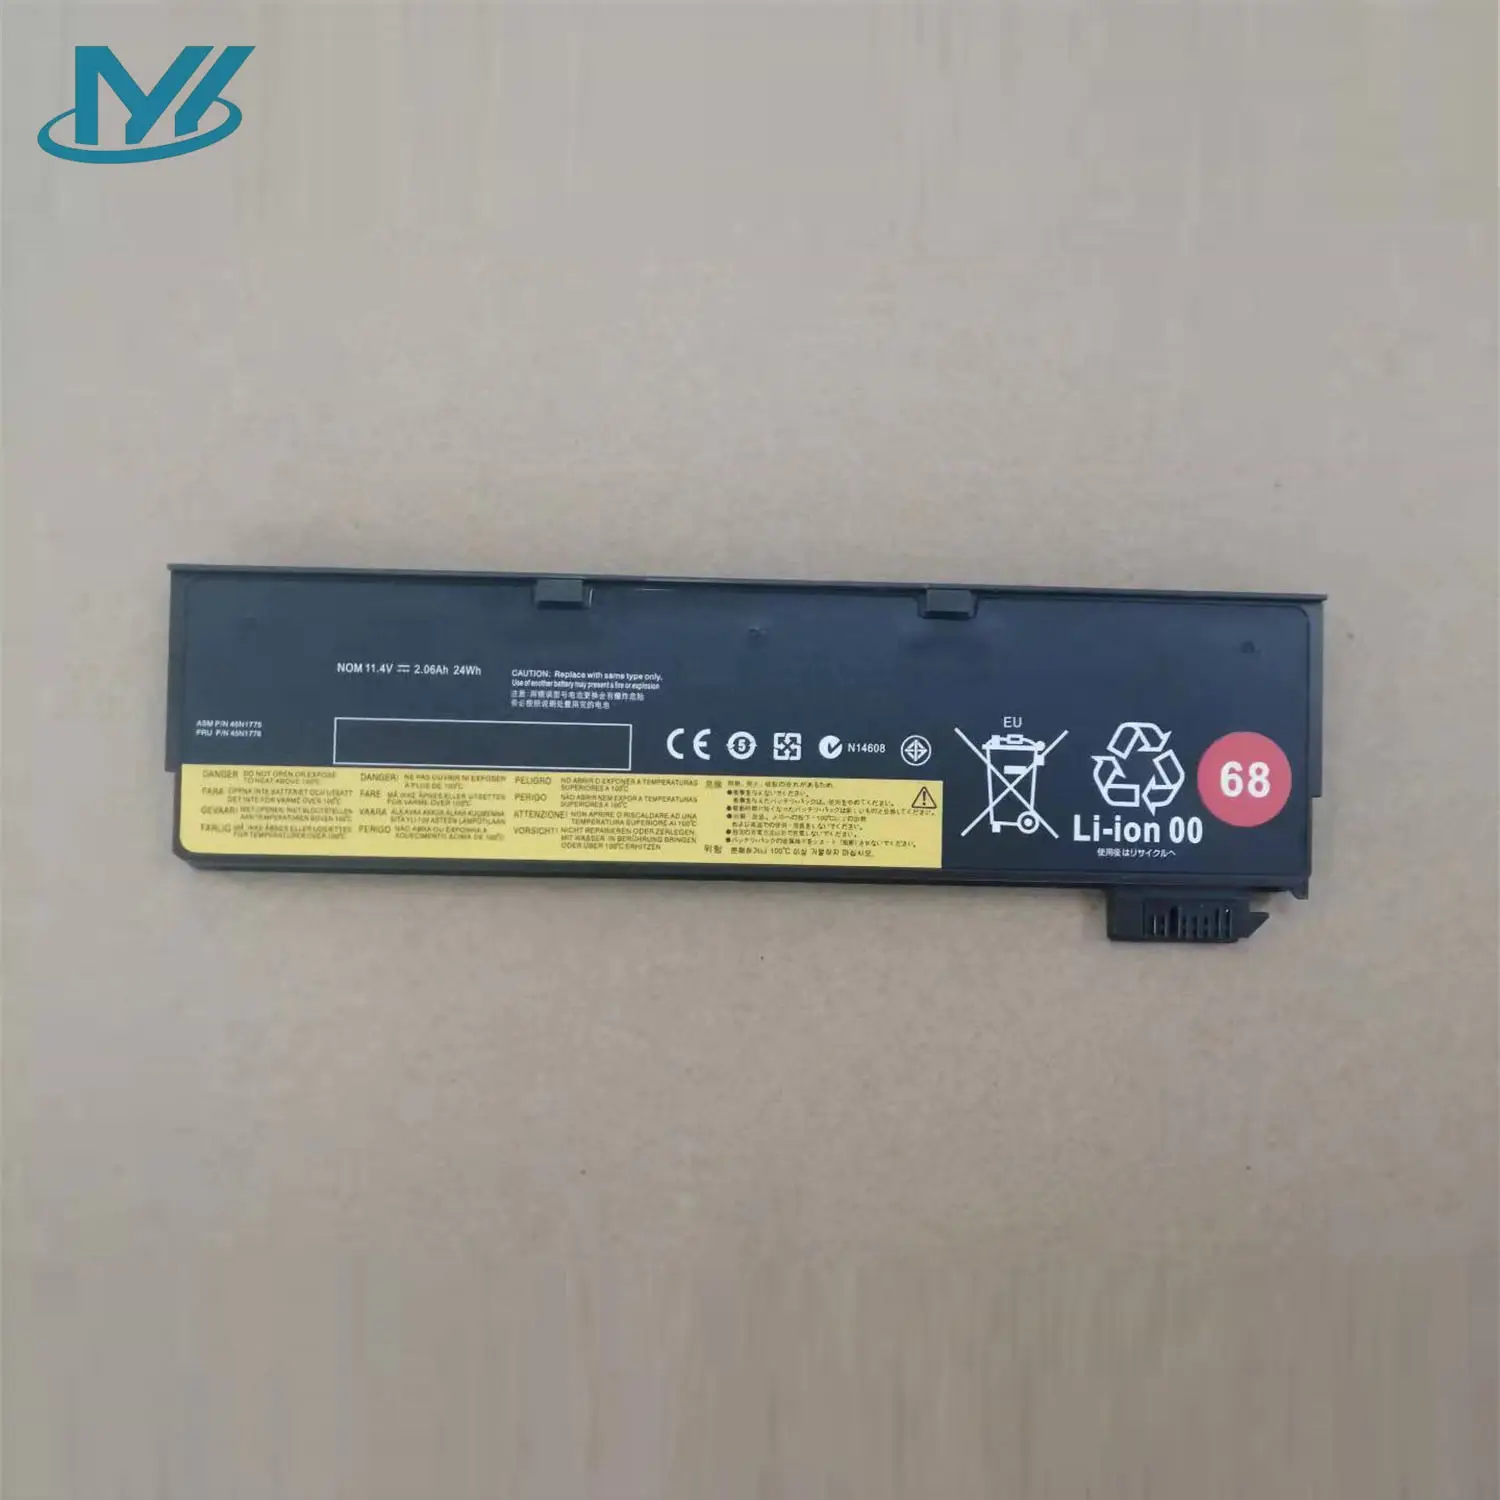 X240 Laptop battery for Lenovo notebook computer X240 X250 X260 X270 L450 L470 battery 2100-4400mAh Compatible 45N1775 45N1776